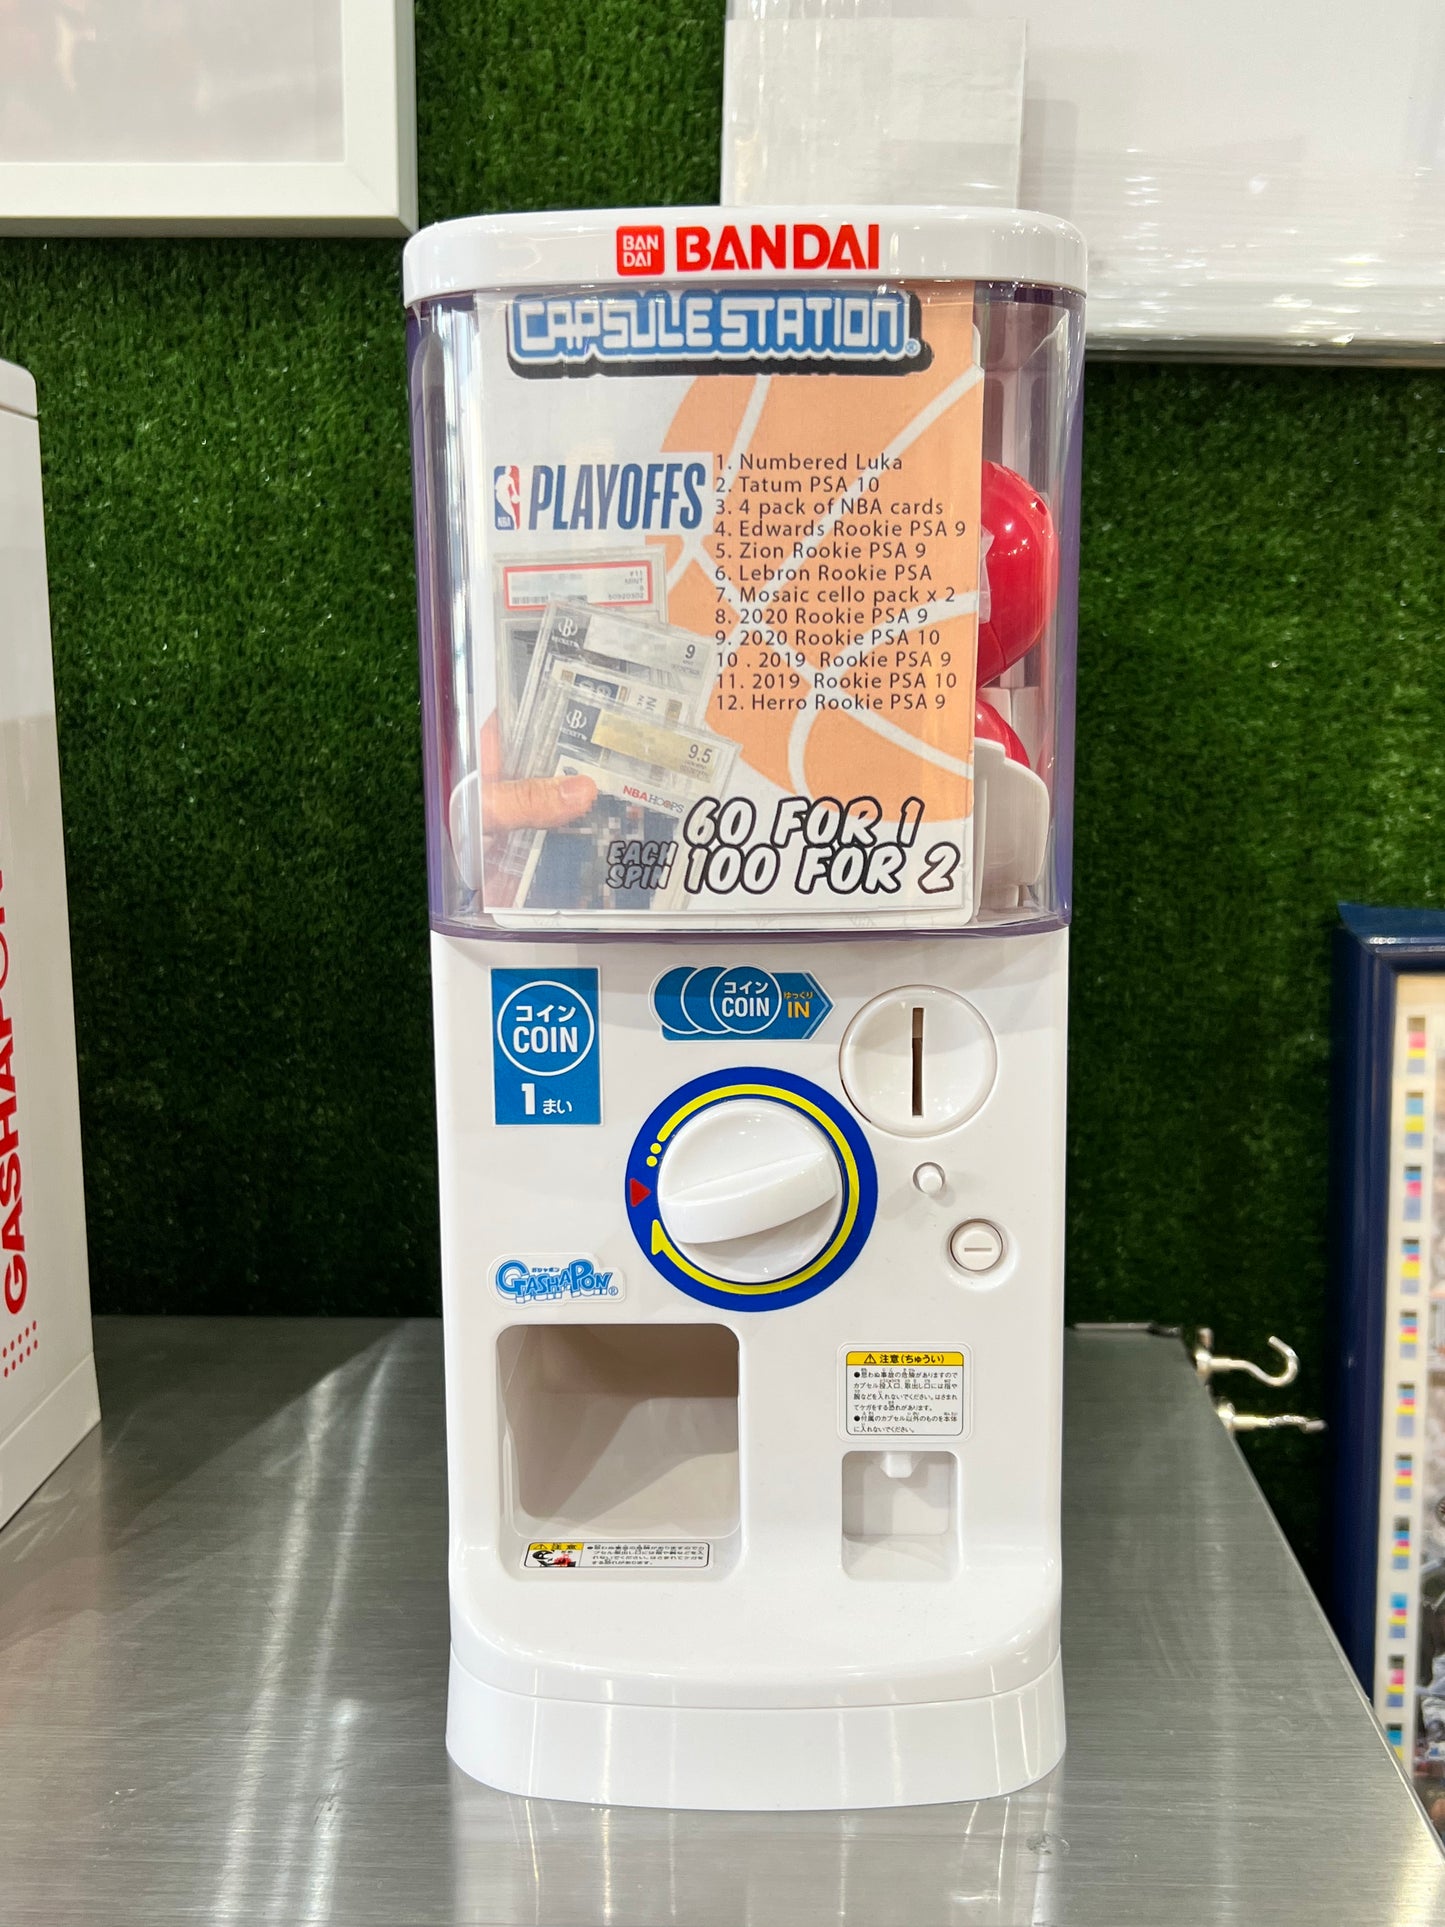 *NBA PlayOff Mystery card capsule station may6 , $60 / $100